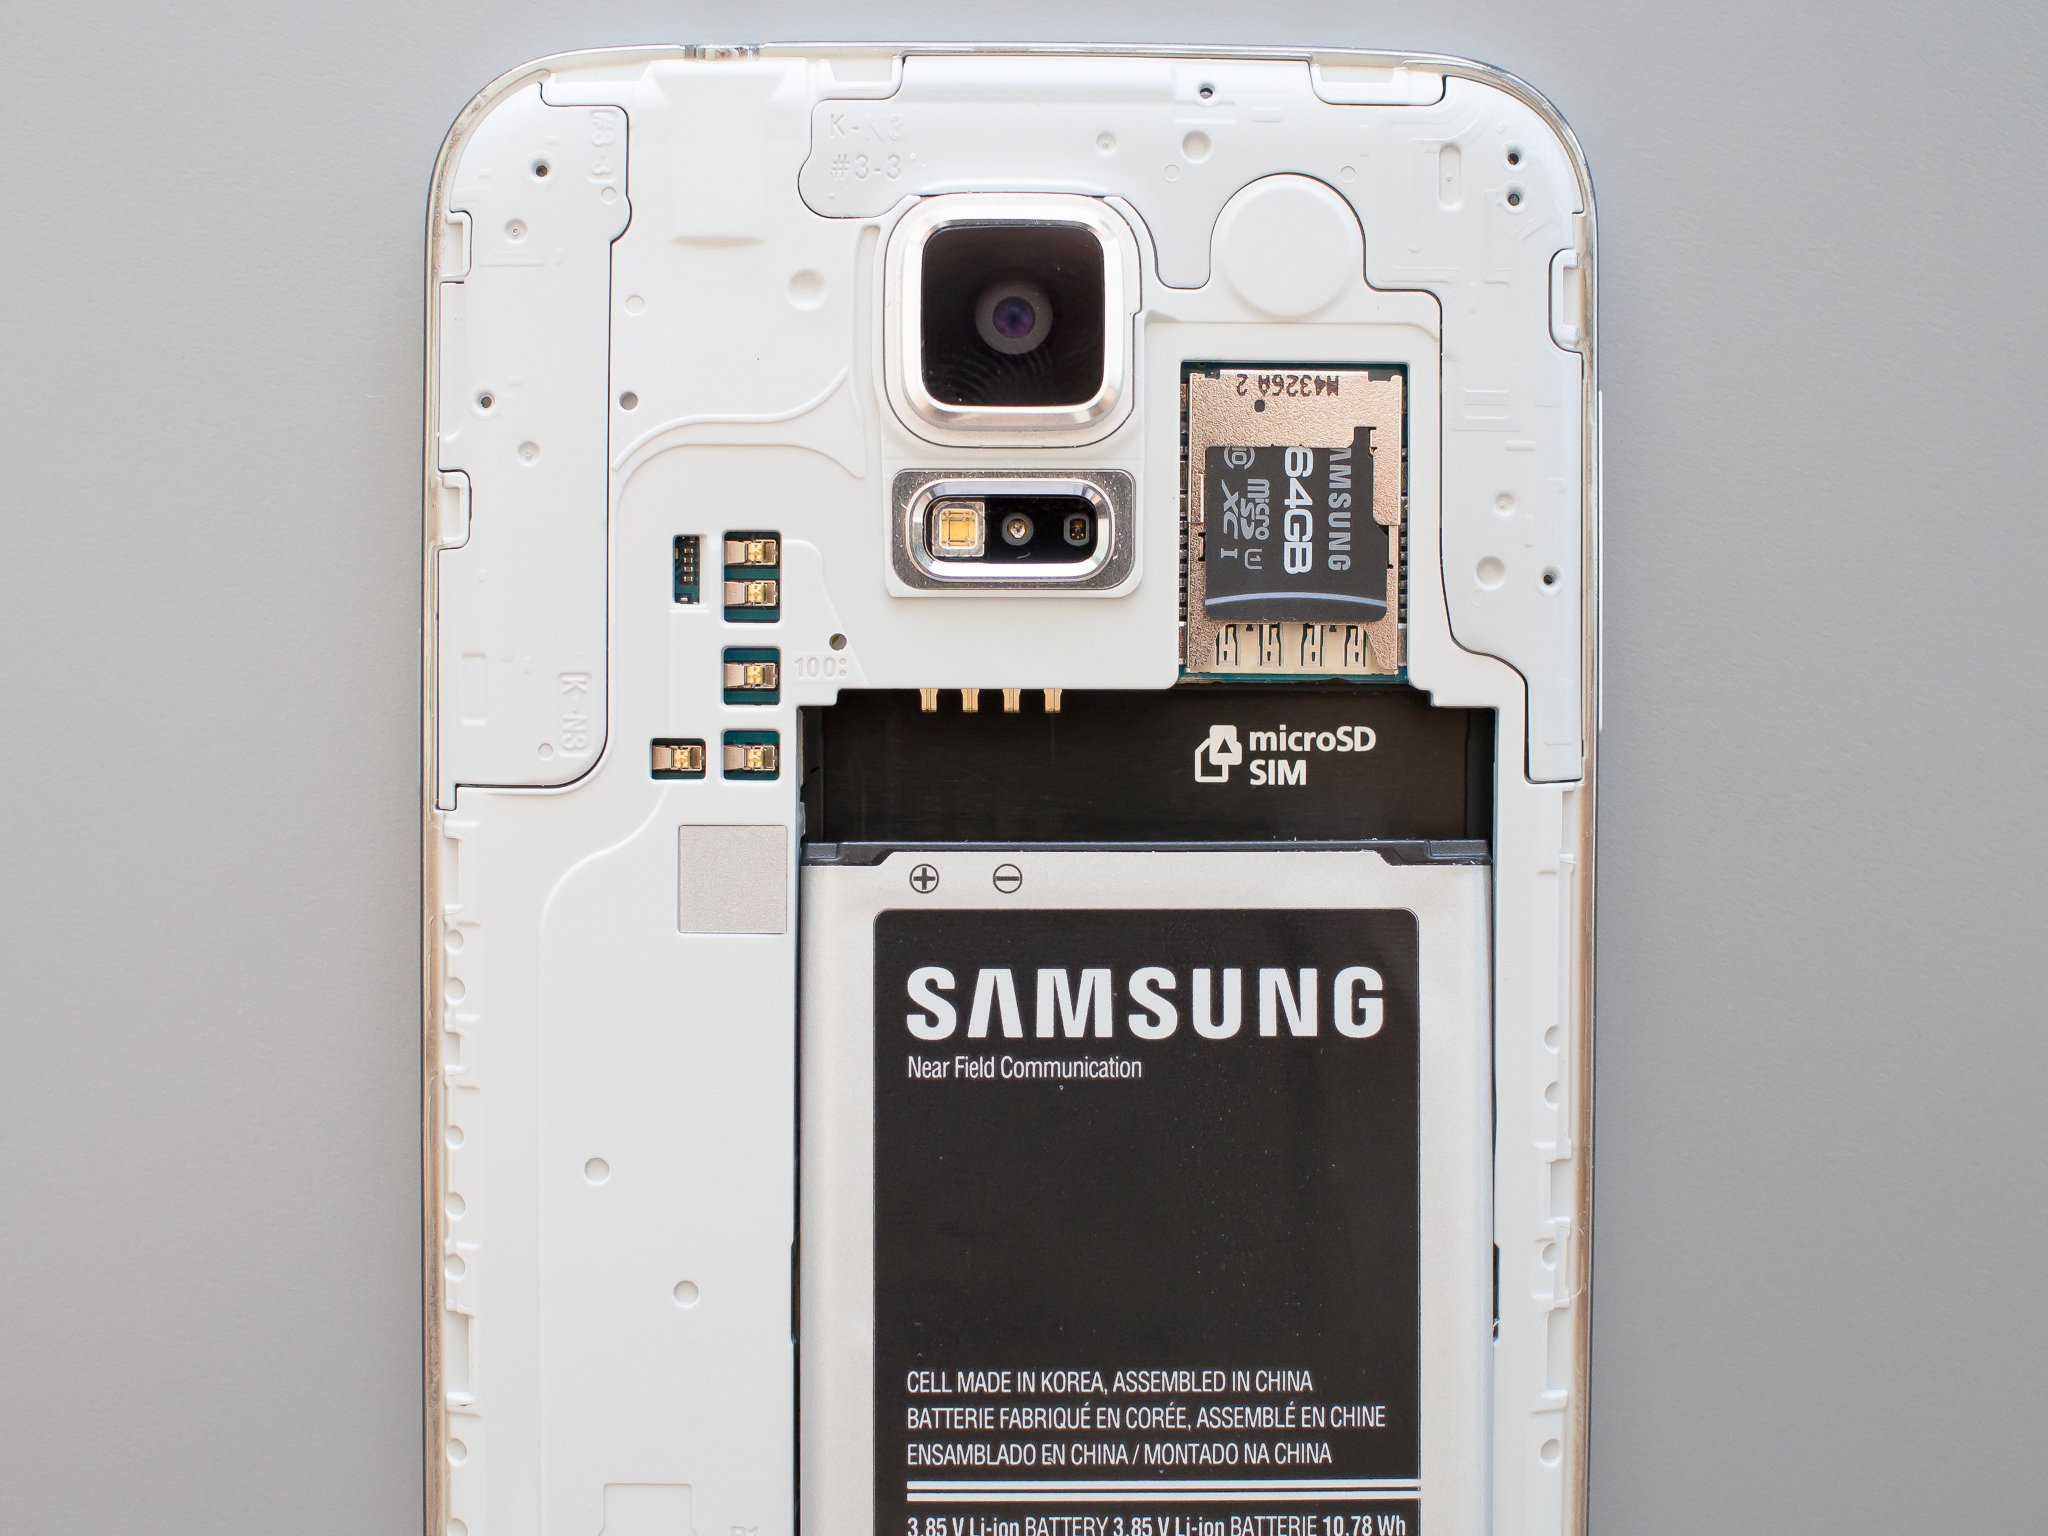 How To Insert Memory Card - Samsung Galaxy S5 - Prime ...